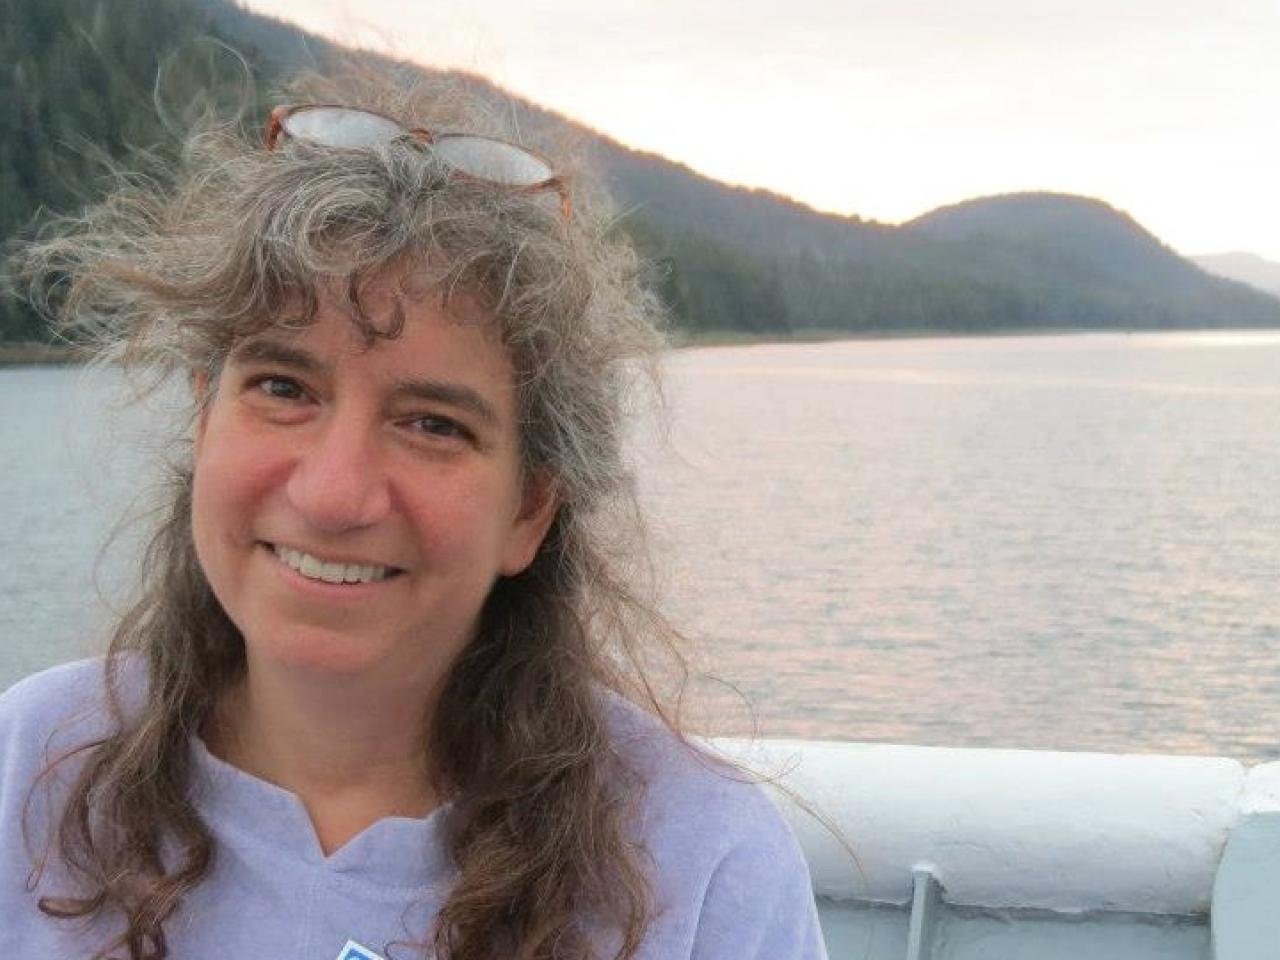 A headshot of New Day filmmaker Ellen Brodsky. Ellen smiles and stands on a boat with the ocean and mountains in the background. Her glasses are on top of her hair which is blowing in the breeze.